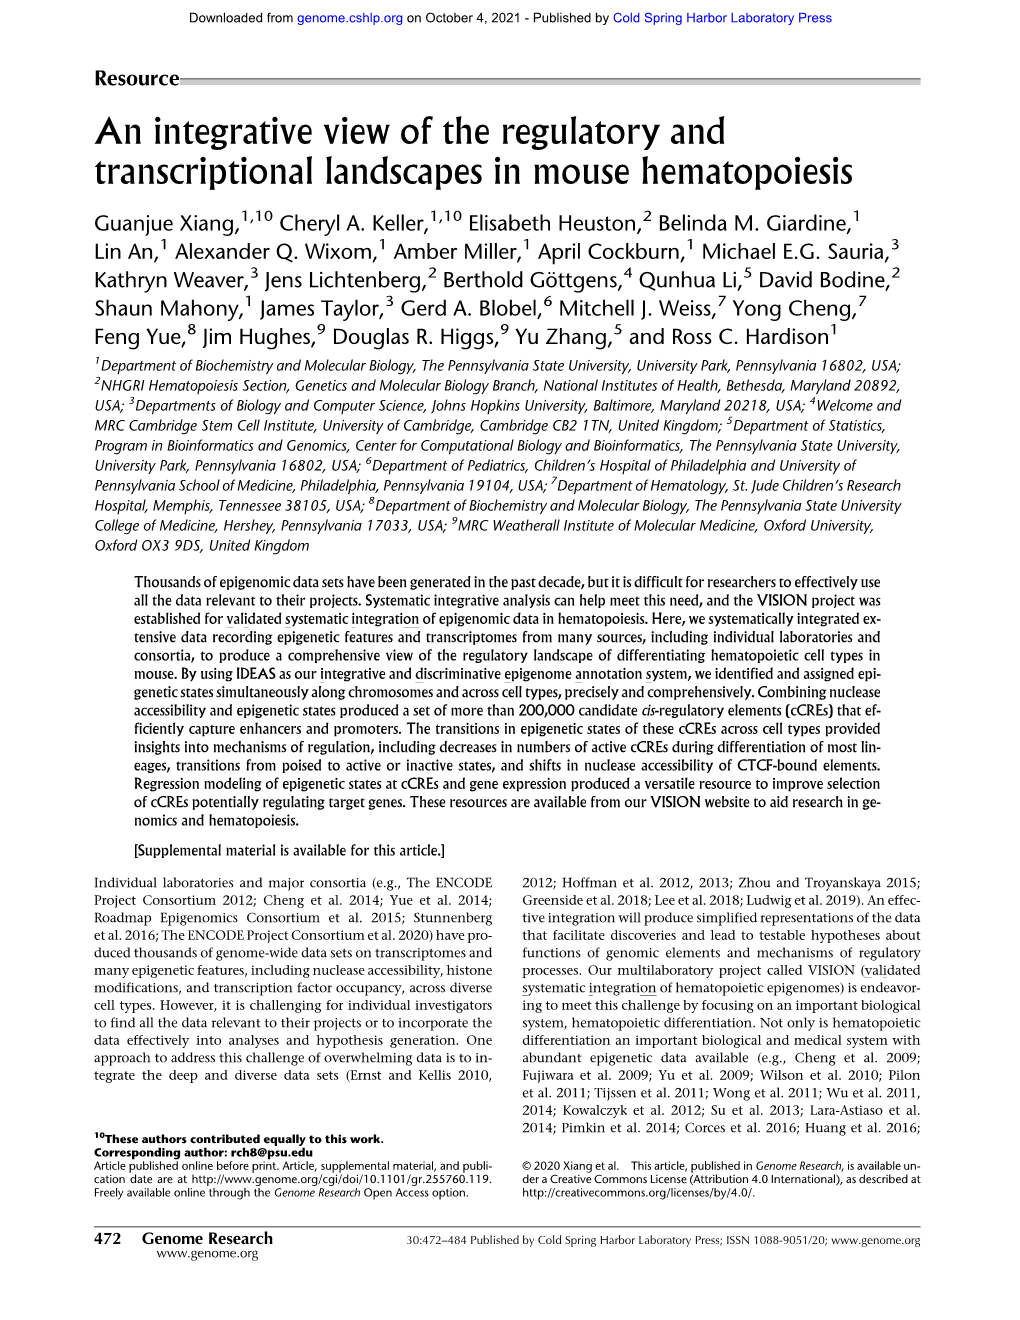 An Integrative View of the Regulatory and Transcriptional Landscapes in Mouse Hematopoiesis